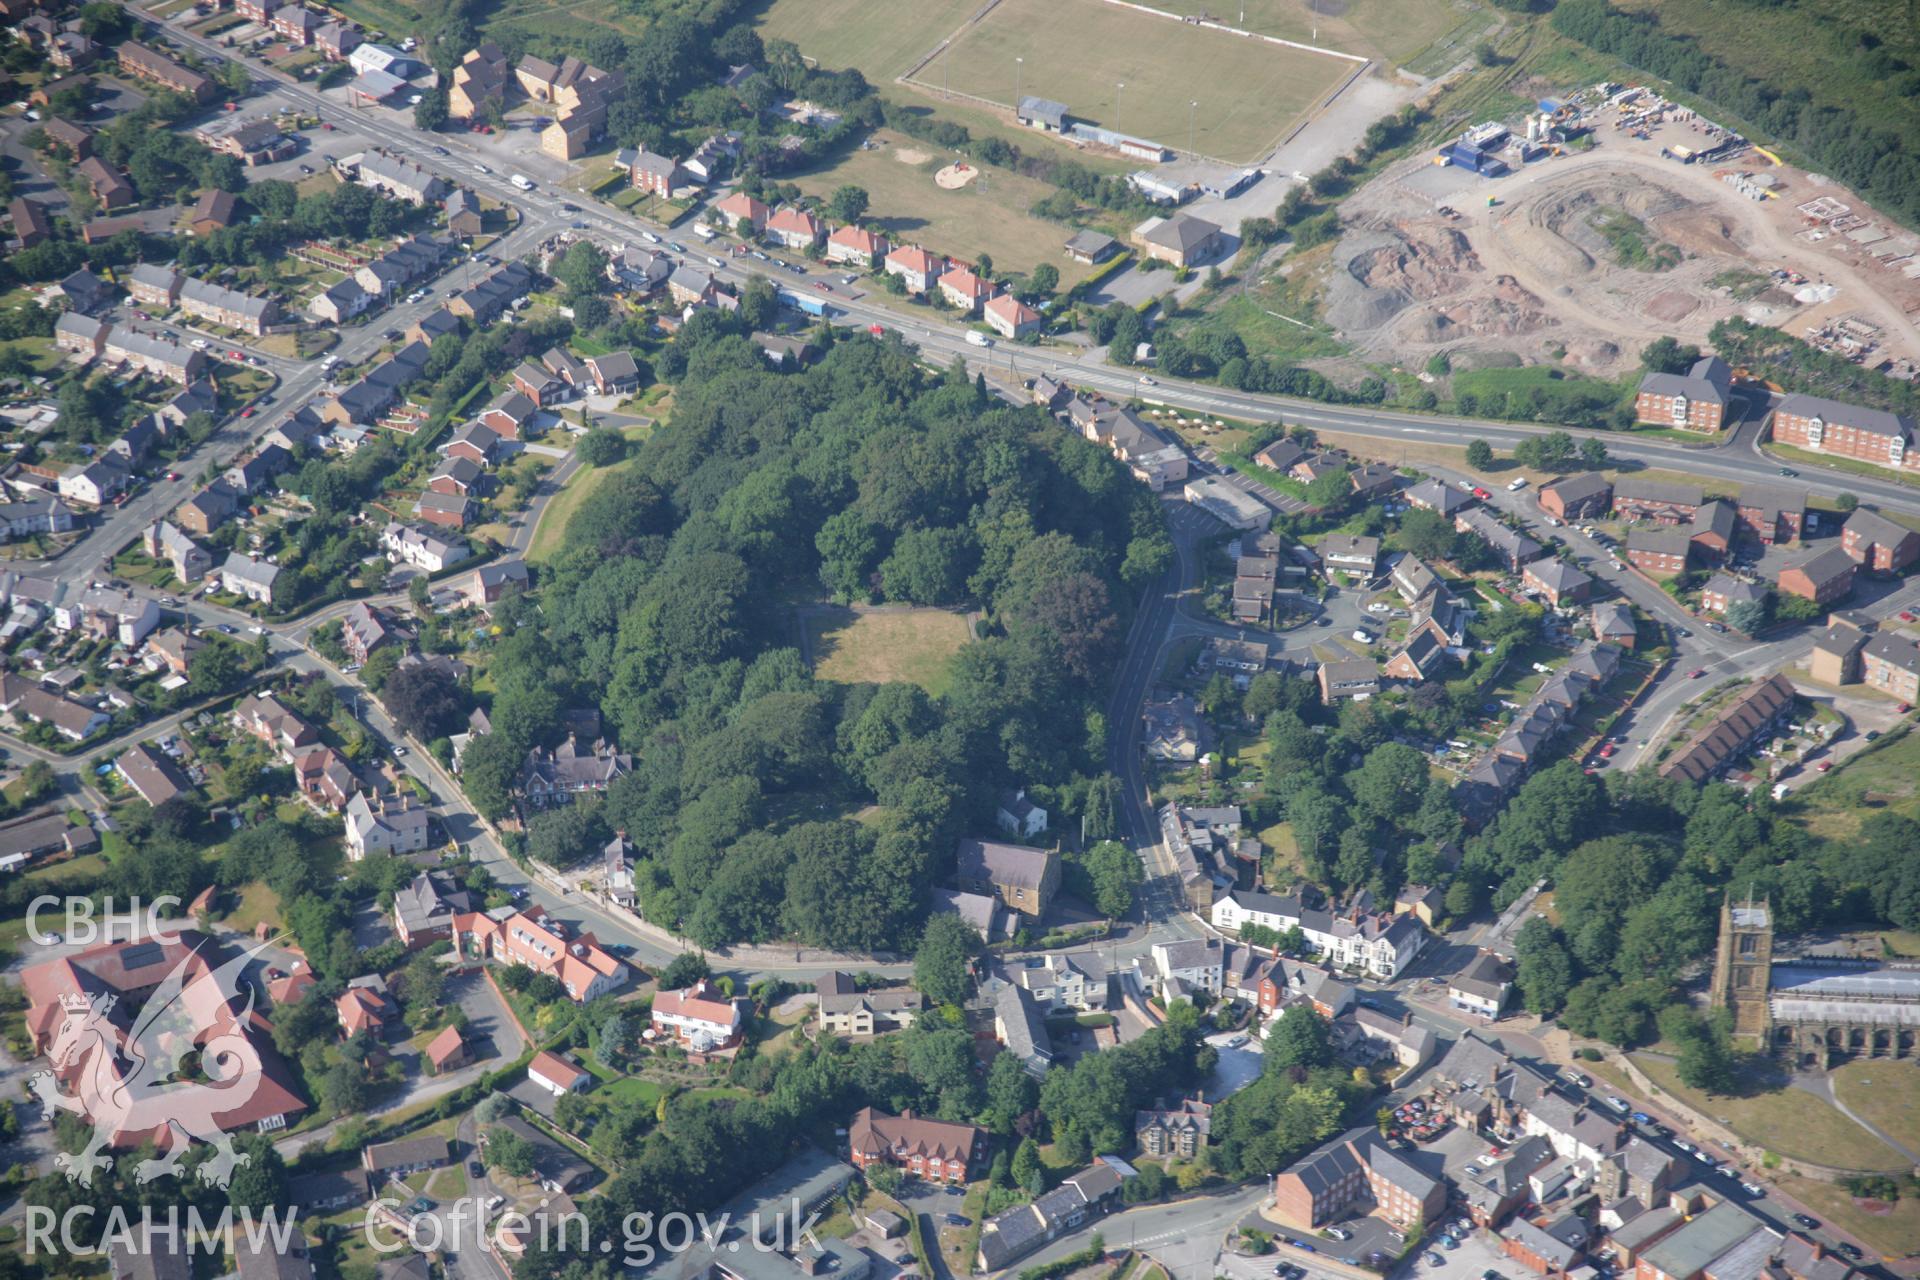 RCAHMW colour oblique aerial photograph of Mold Castle. Taken on 17 July 2006 by Toby Driver.